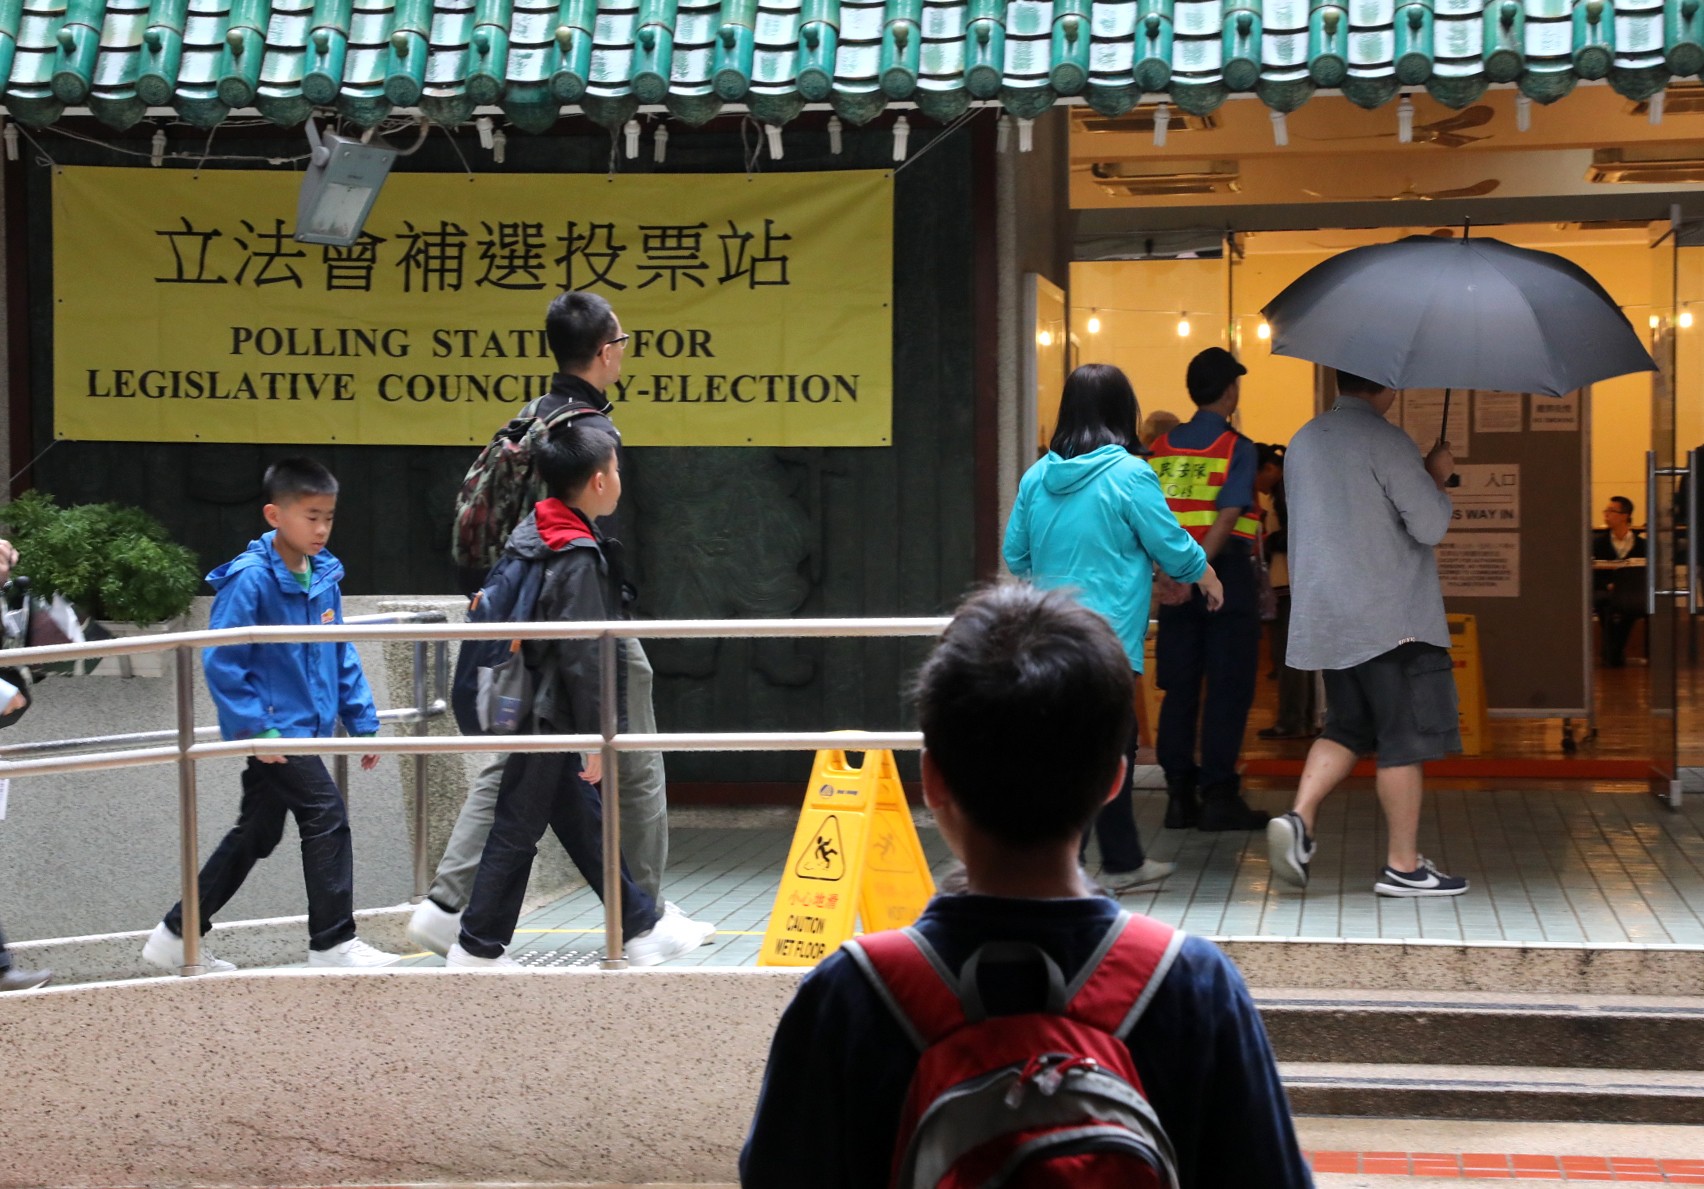 Voters arrive at a polling station for a Legislative Council by-election, in Mei Foo on November 25, 2018. Photo: Felix Wong